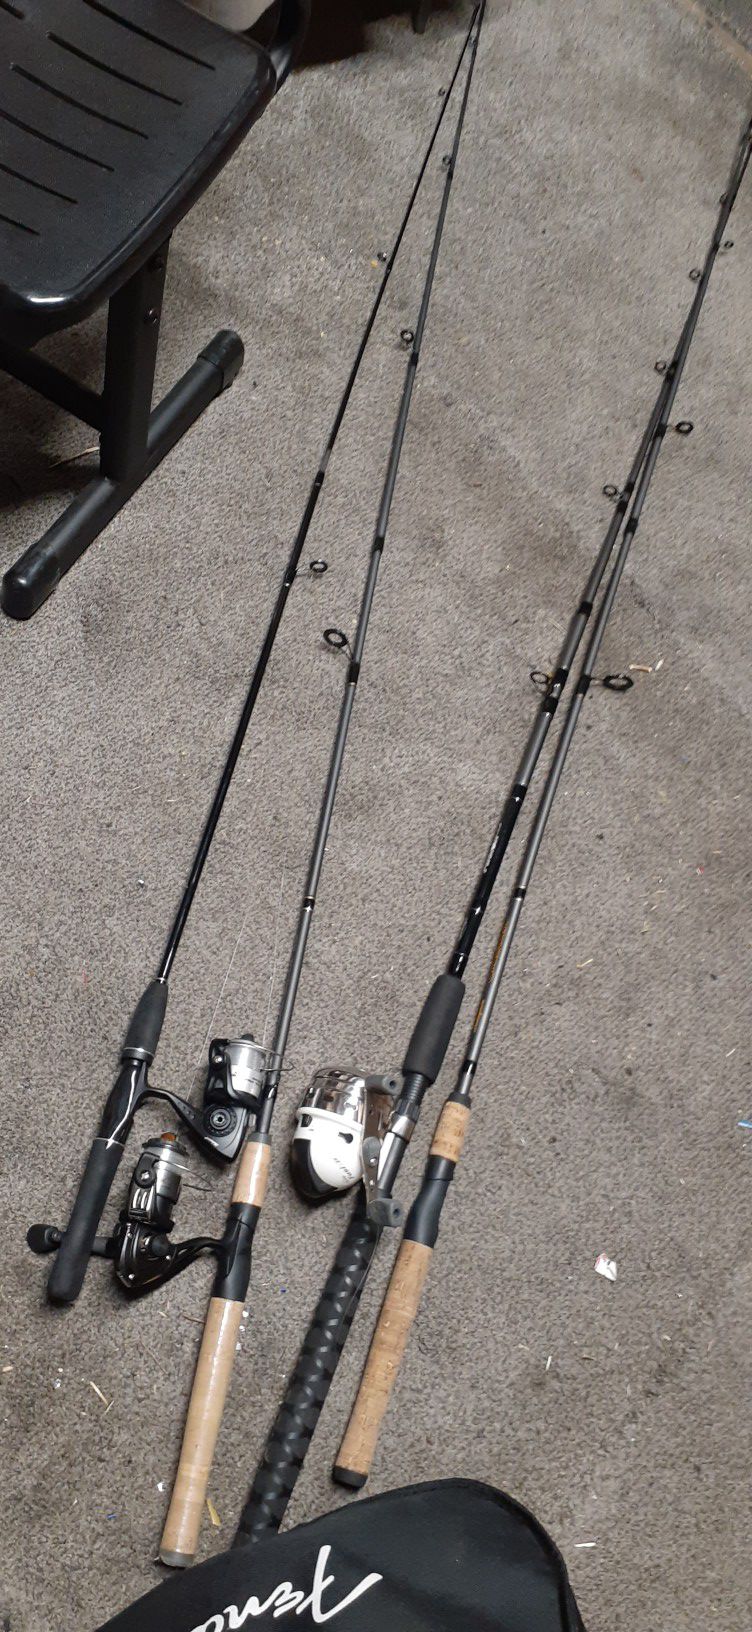 4 fishing rods 3 reels and some tackle